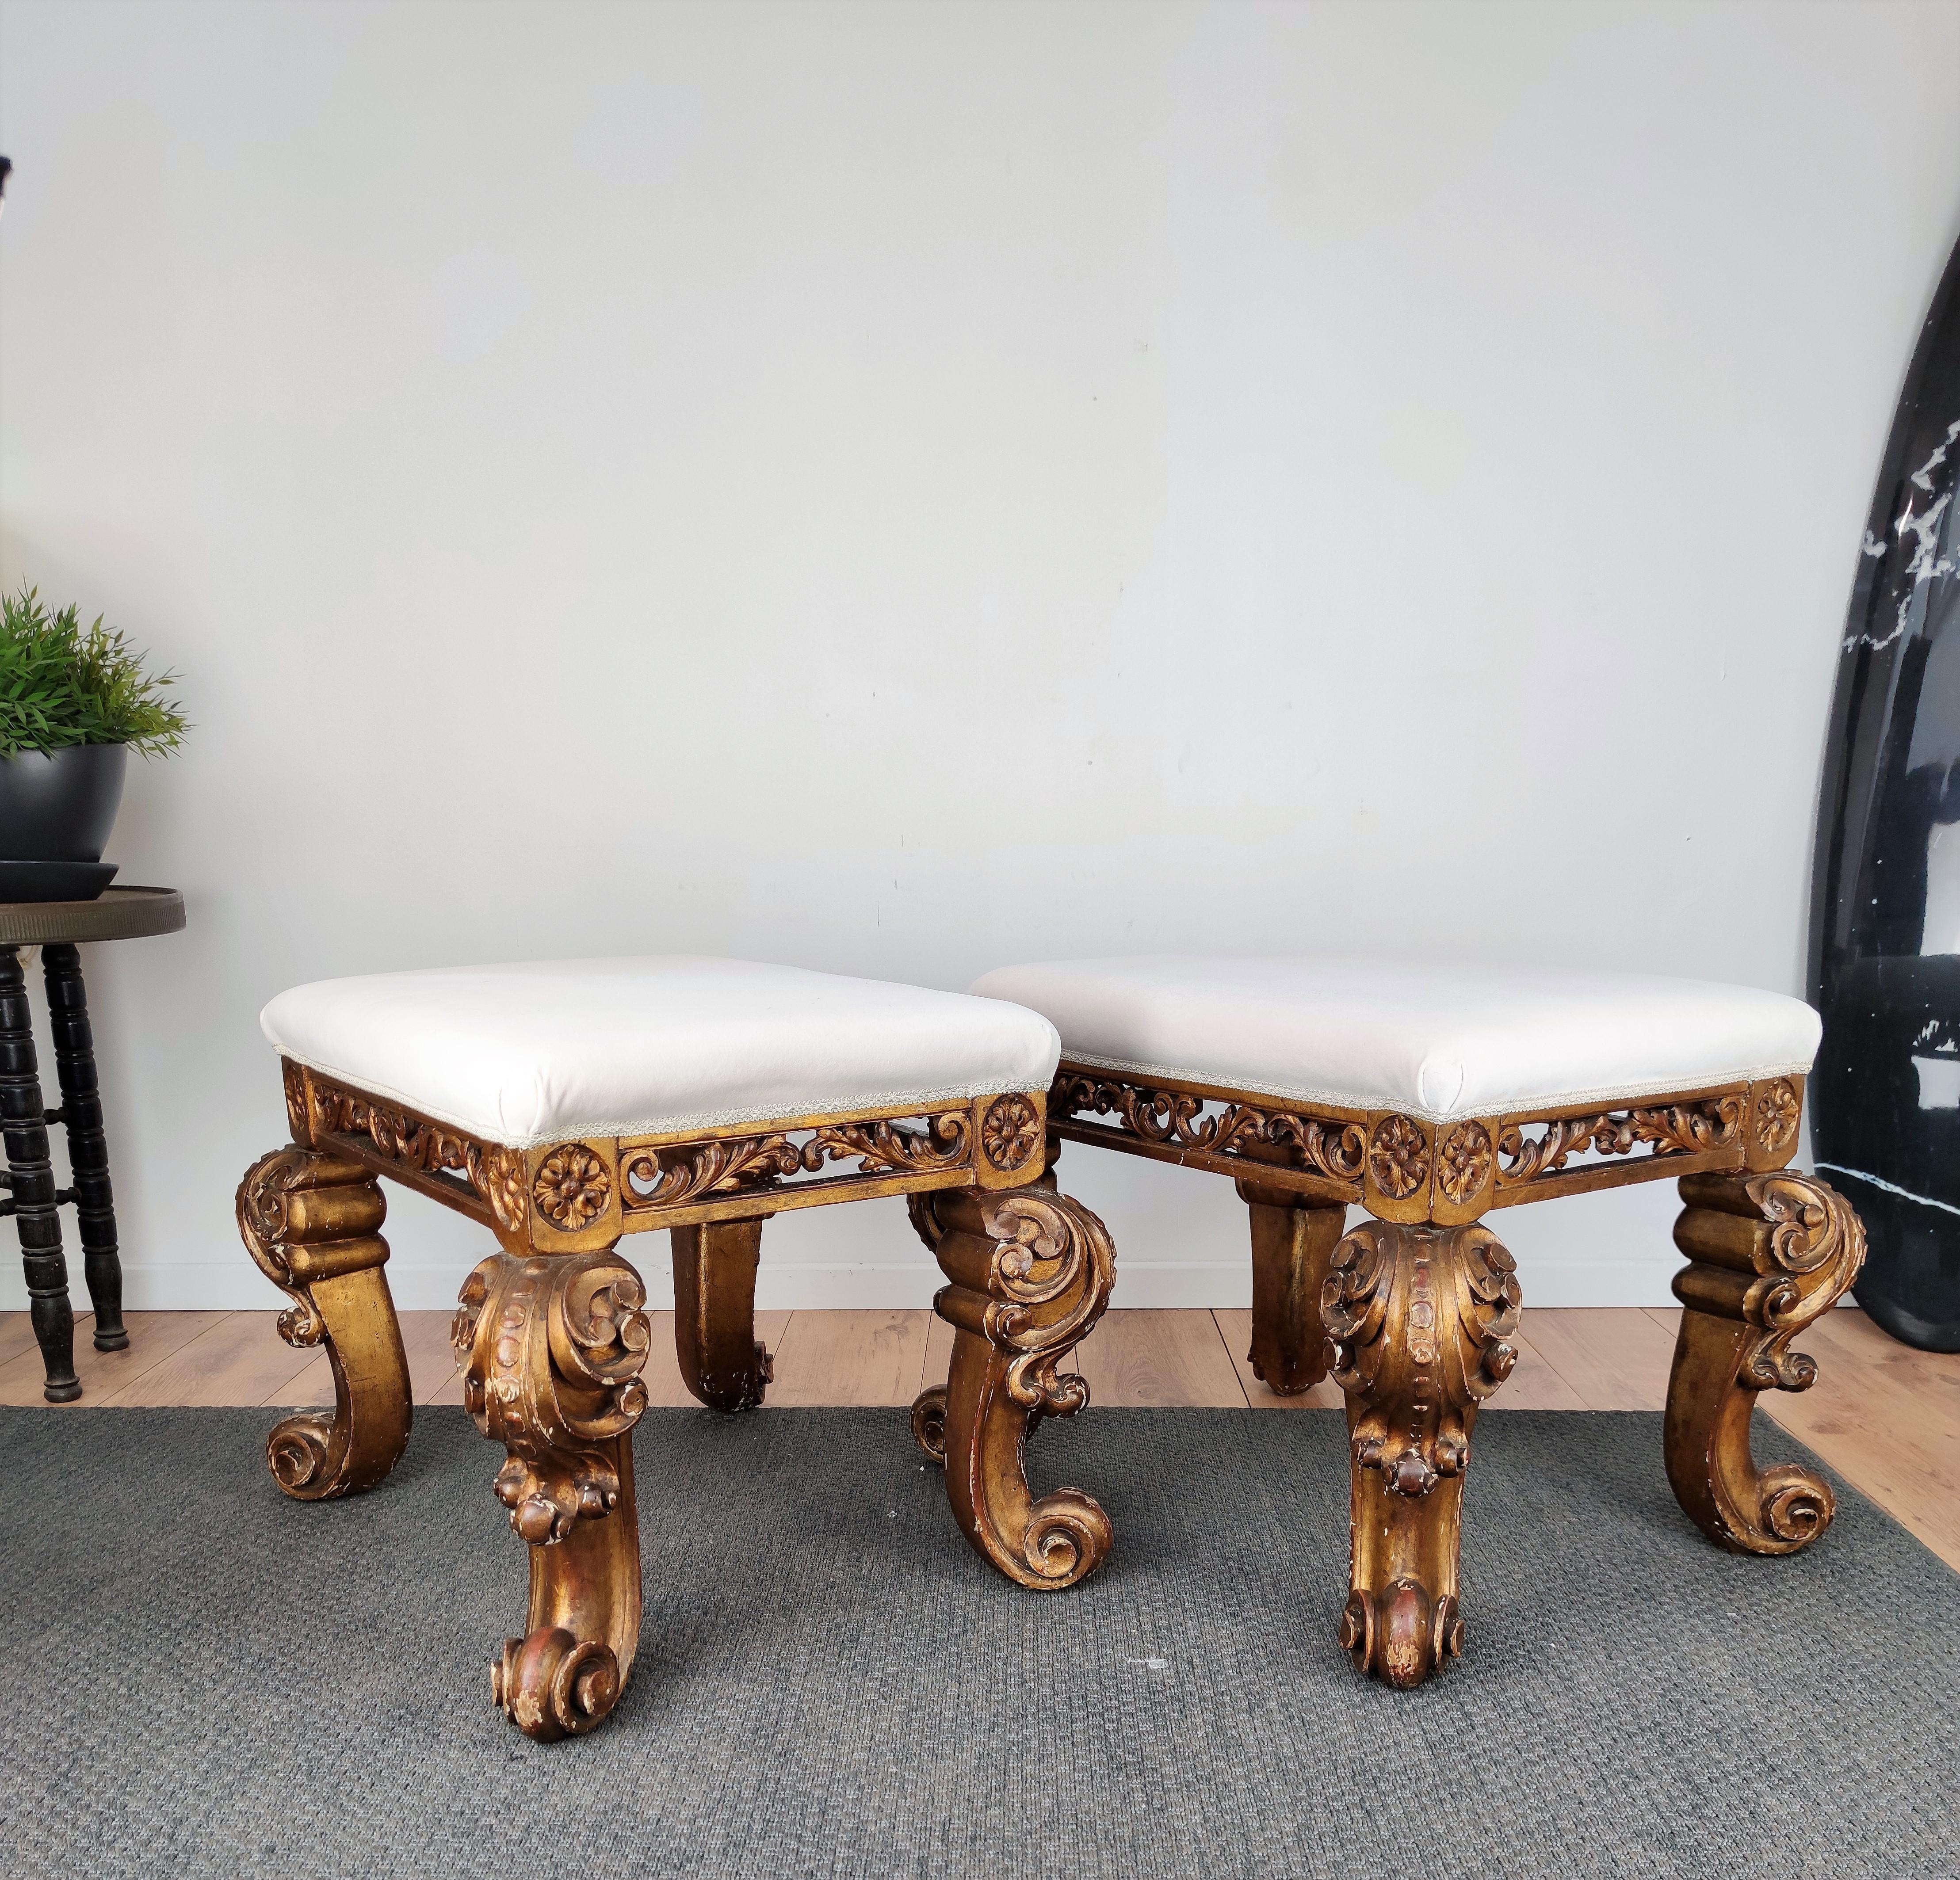 Beautiful, very ornately hand carved wooden, pair of antique 17th century Italian Baroque stools with a gilt finish and newly upholstered white fabric to magnify the workmanship, history, detail and color of the incredible decors of the carved